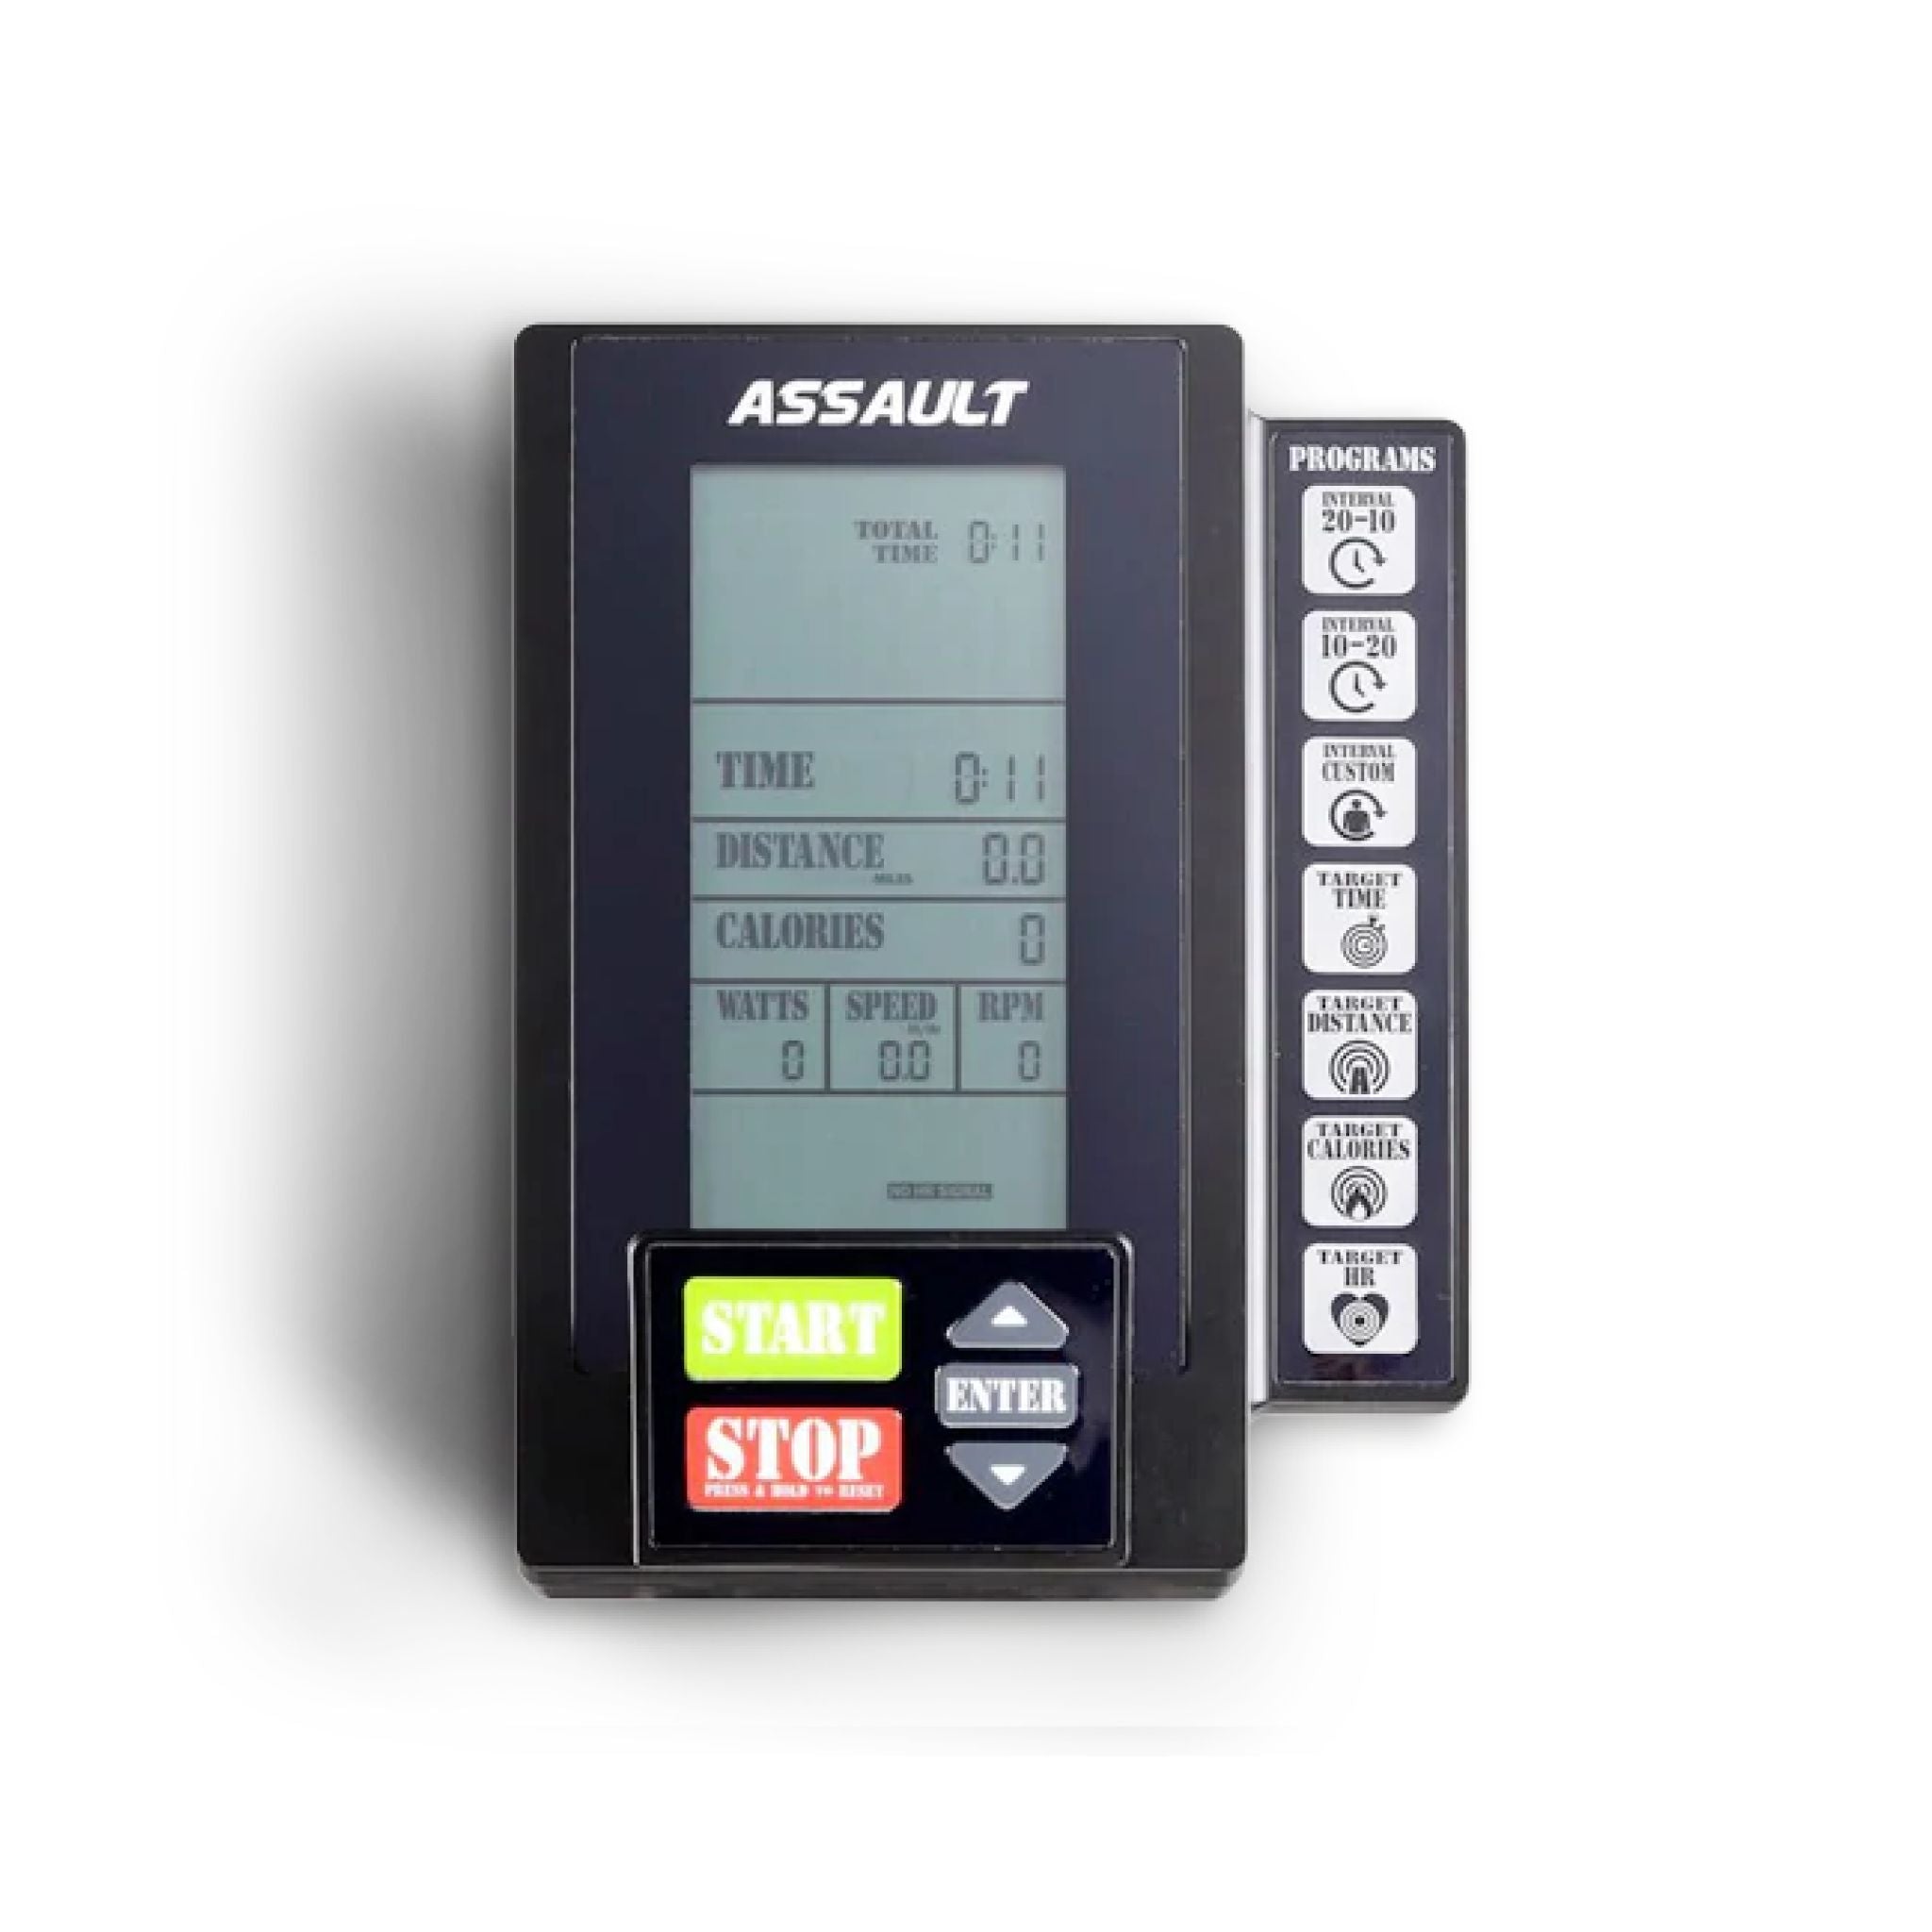 AssaultBike Classic high-contrast LCD console